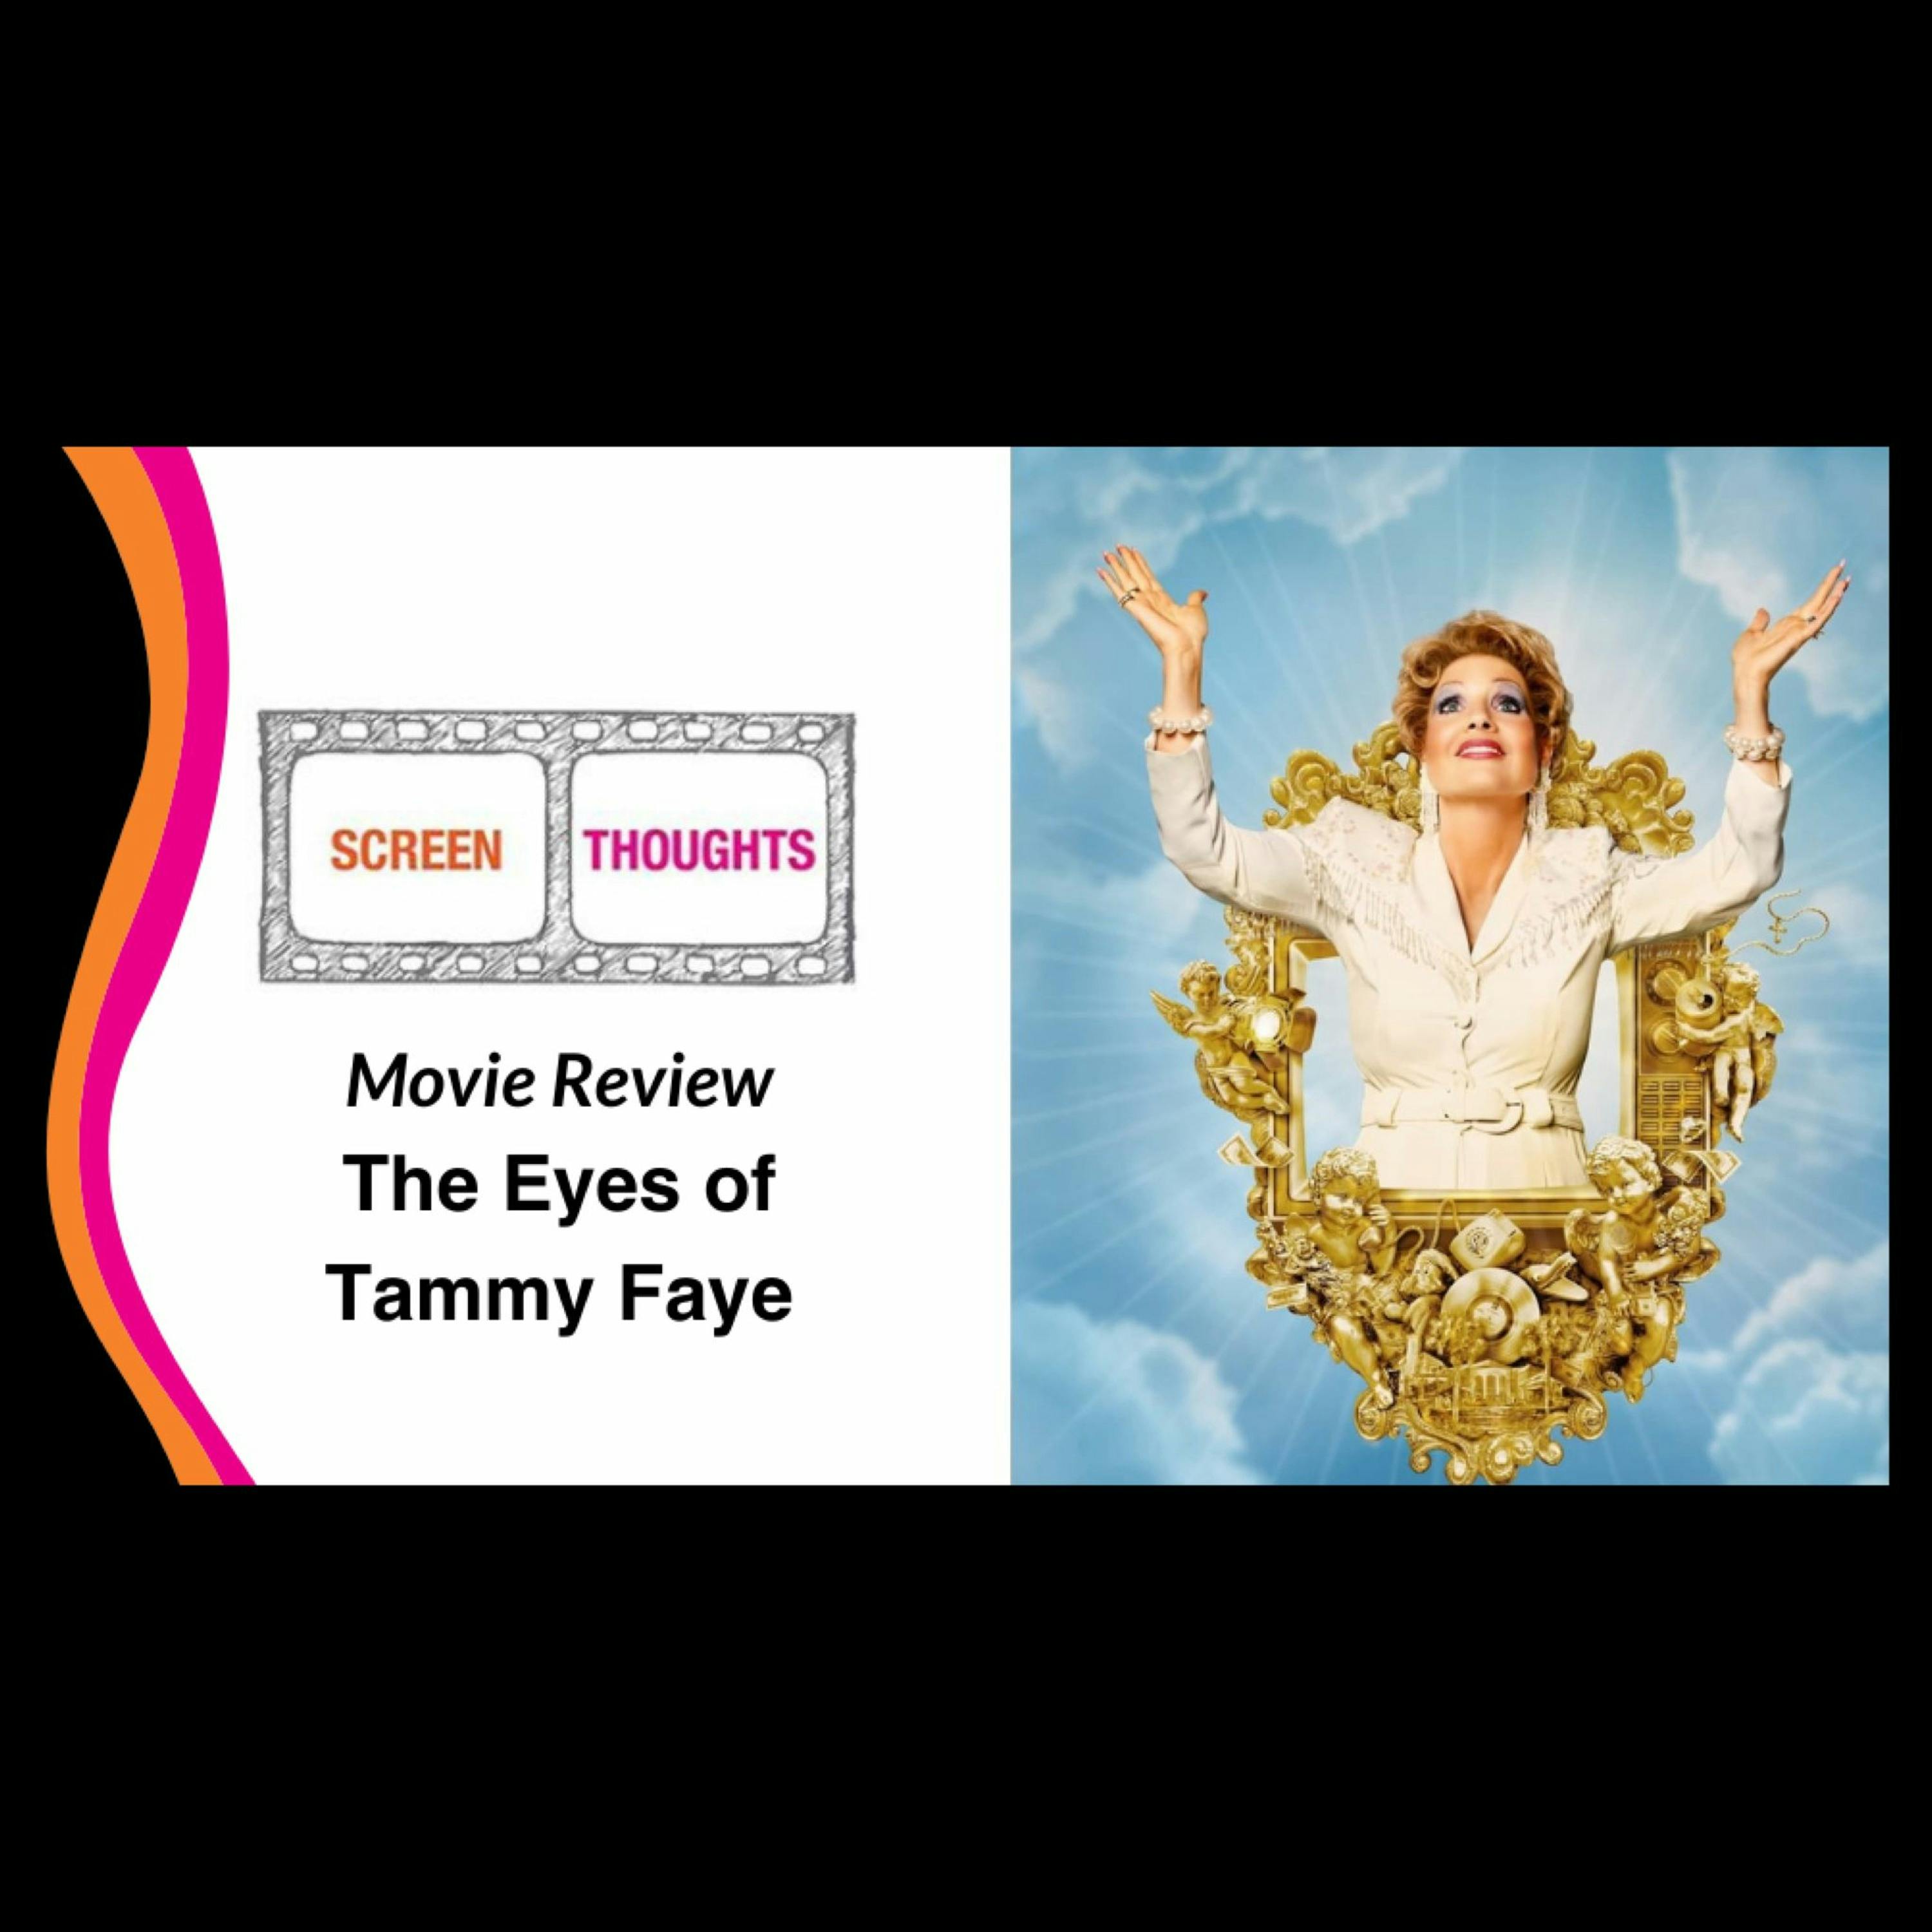 Movie Review: The Eyes of Tammy Faye